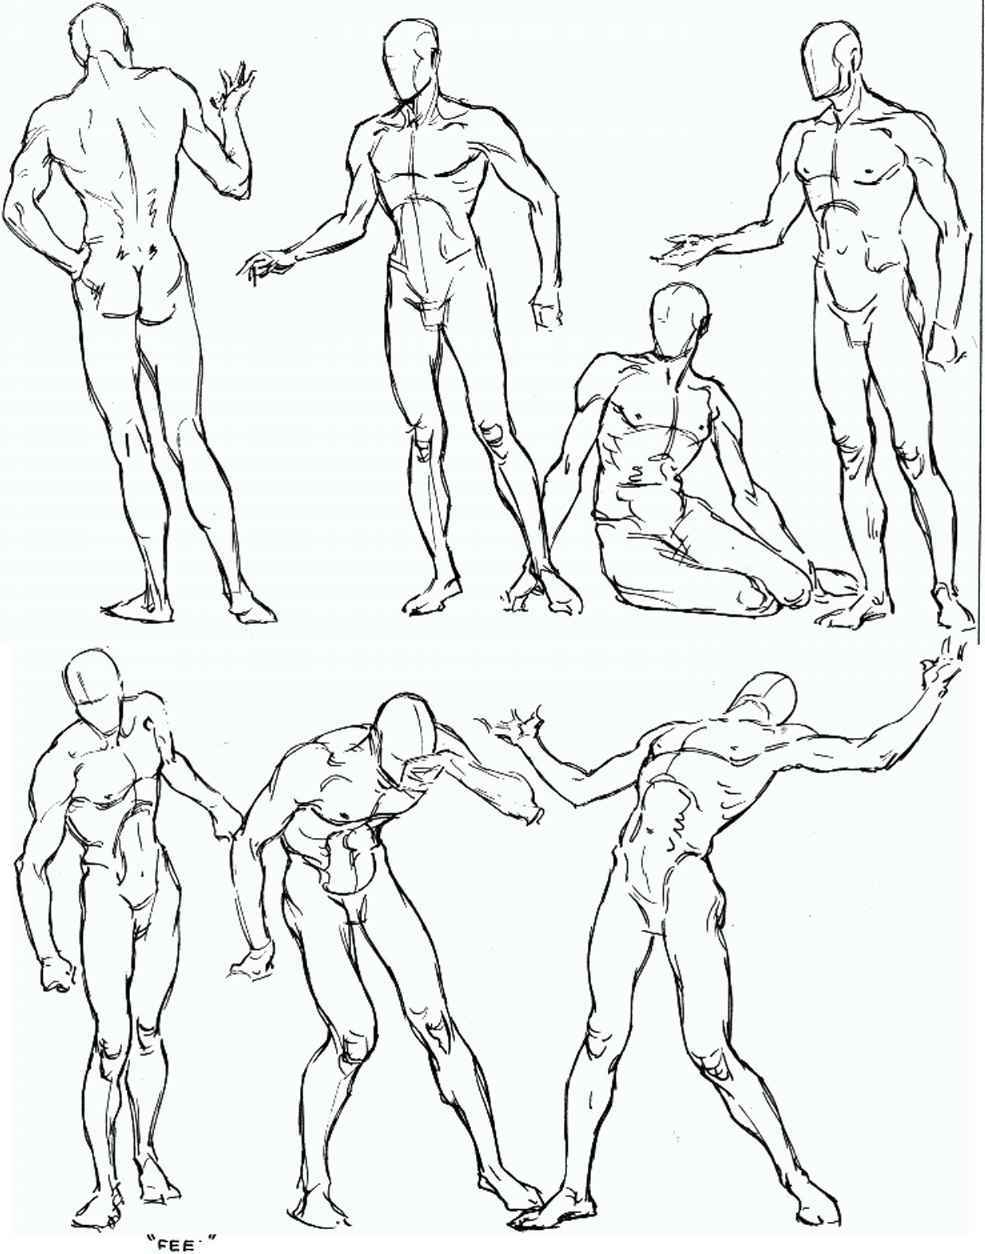 How to Draw Dynamic Poses: Different Action Poses Step by Step